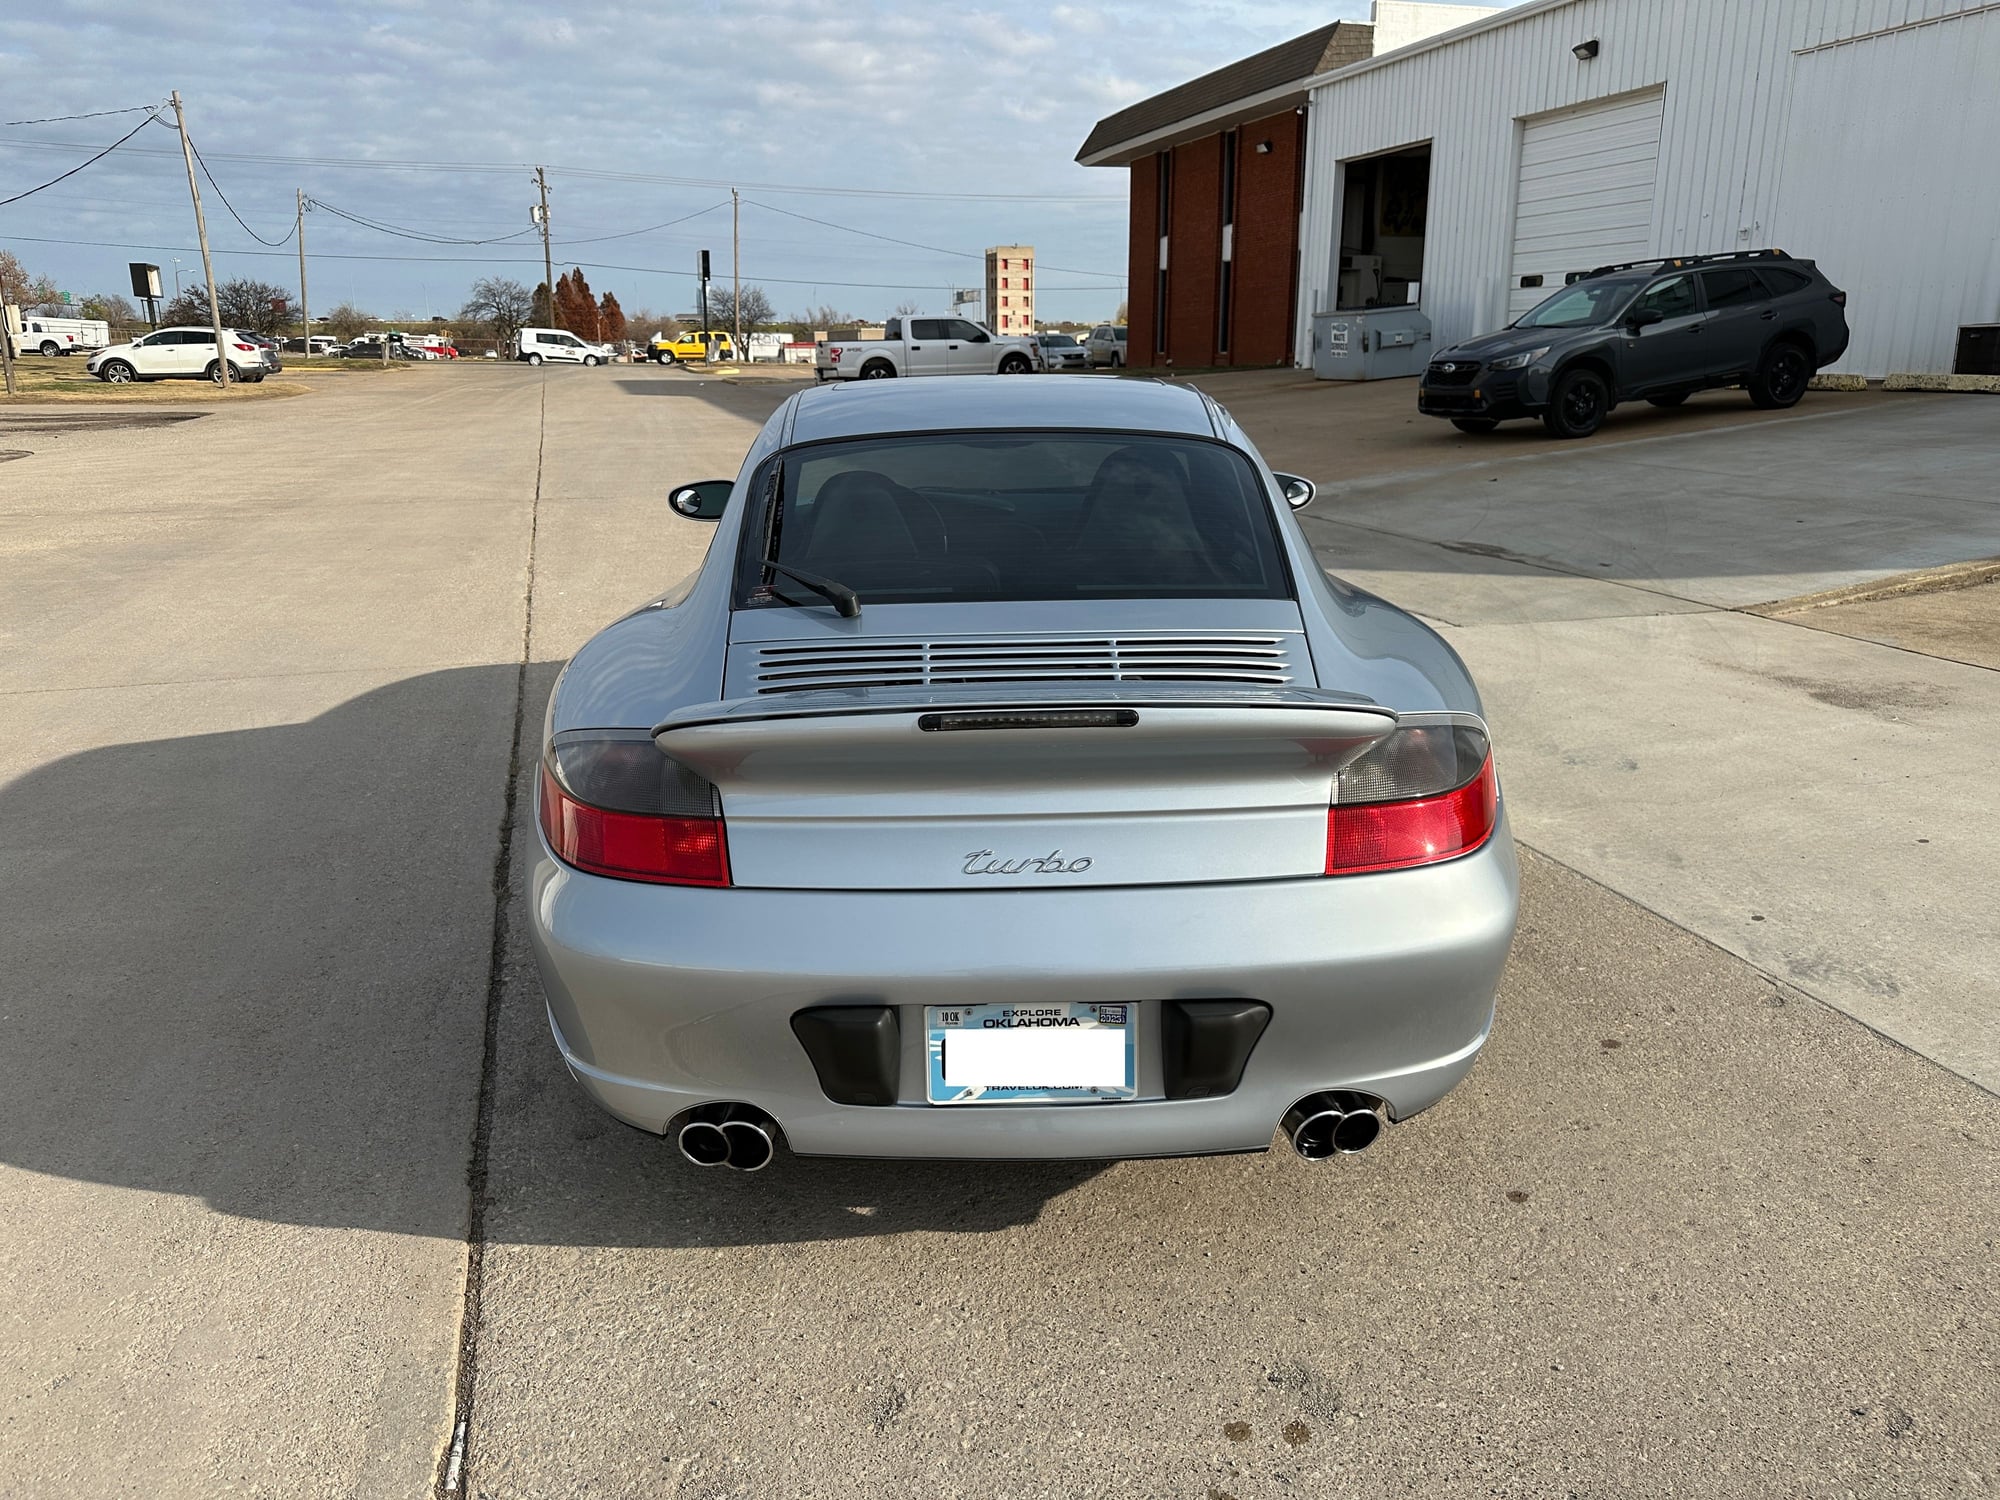 2003 Porsche 911 - 2003 911 996 turbo awd 40,000 miles silver manual - Used - VIN WP0AB29903S686626 - 40,000 Miles - 6 cyl - AWD - Manual - Coupe - Silver - Oklahoma City, OK 73107, United States